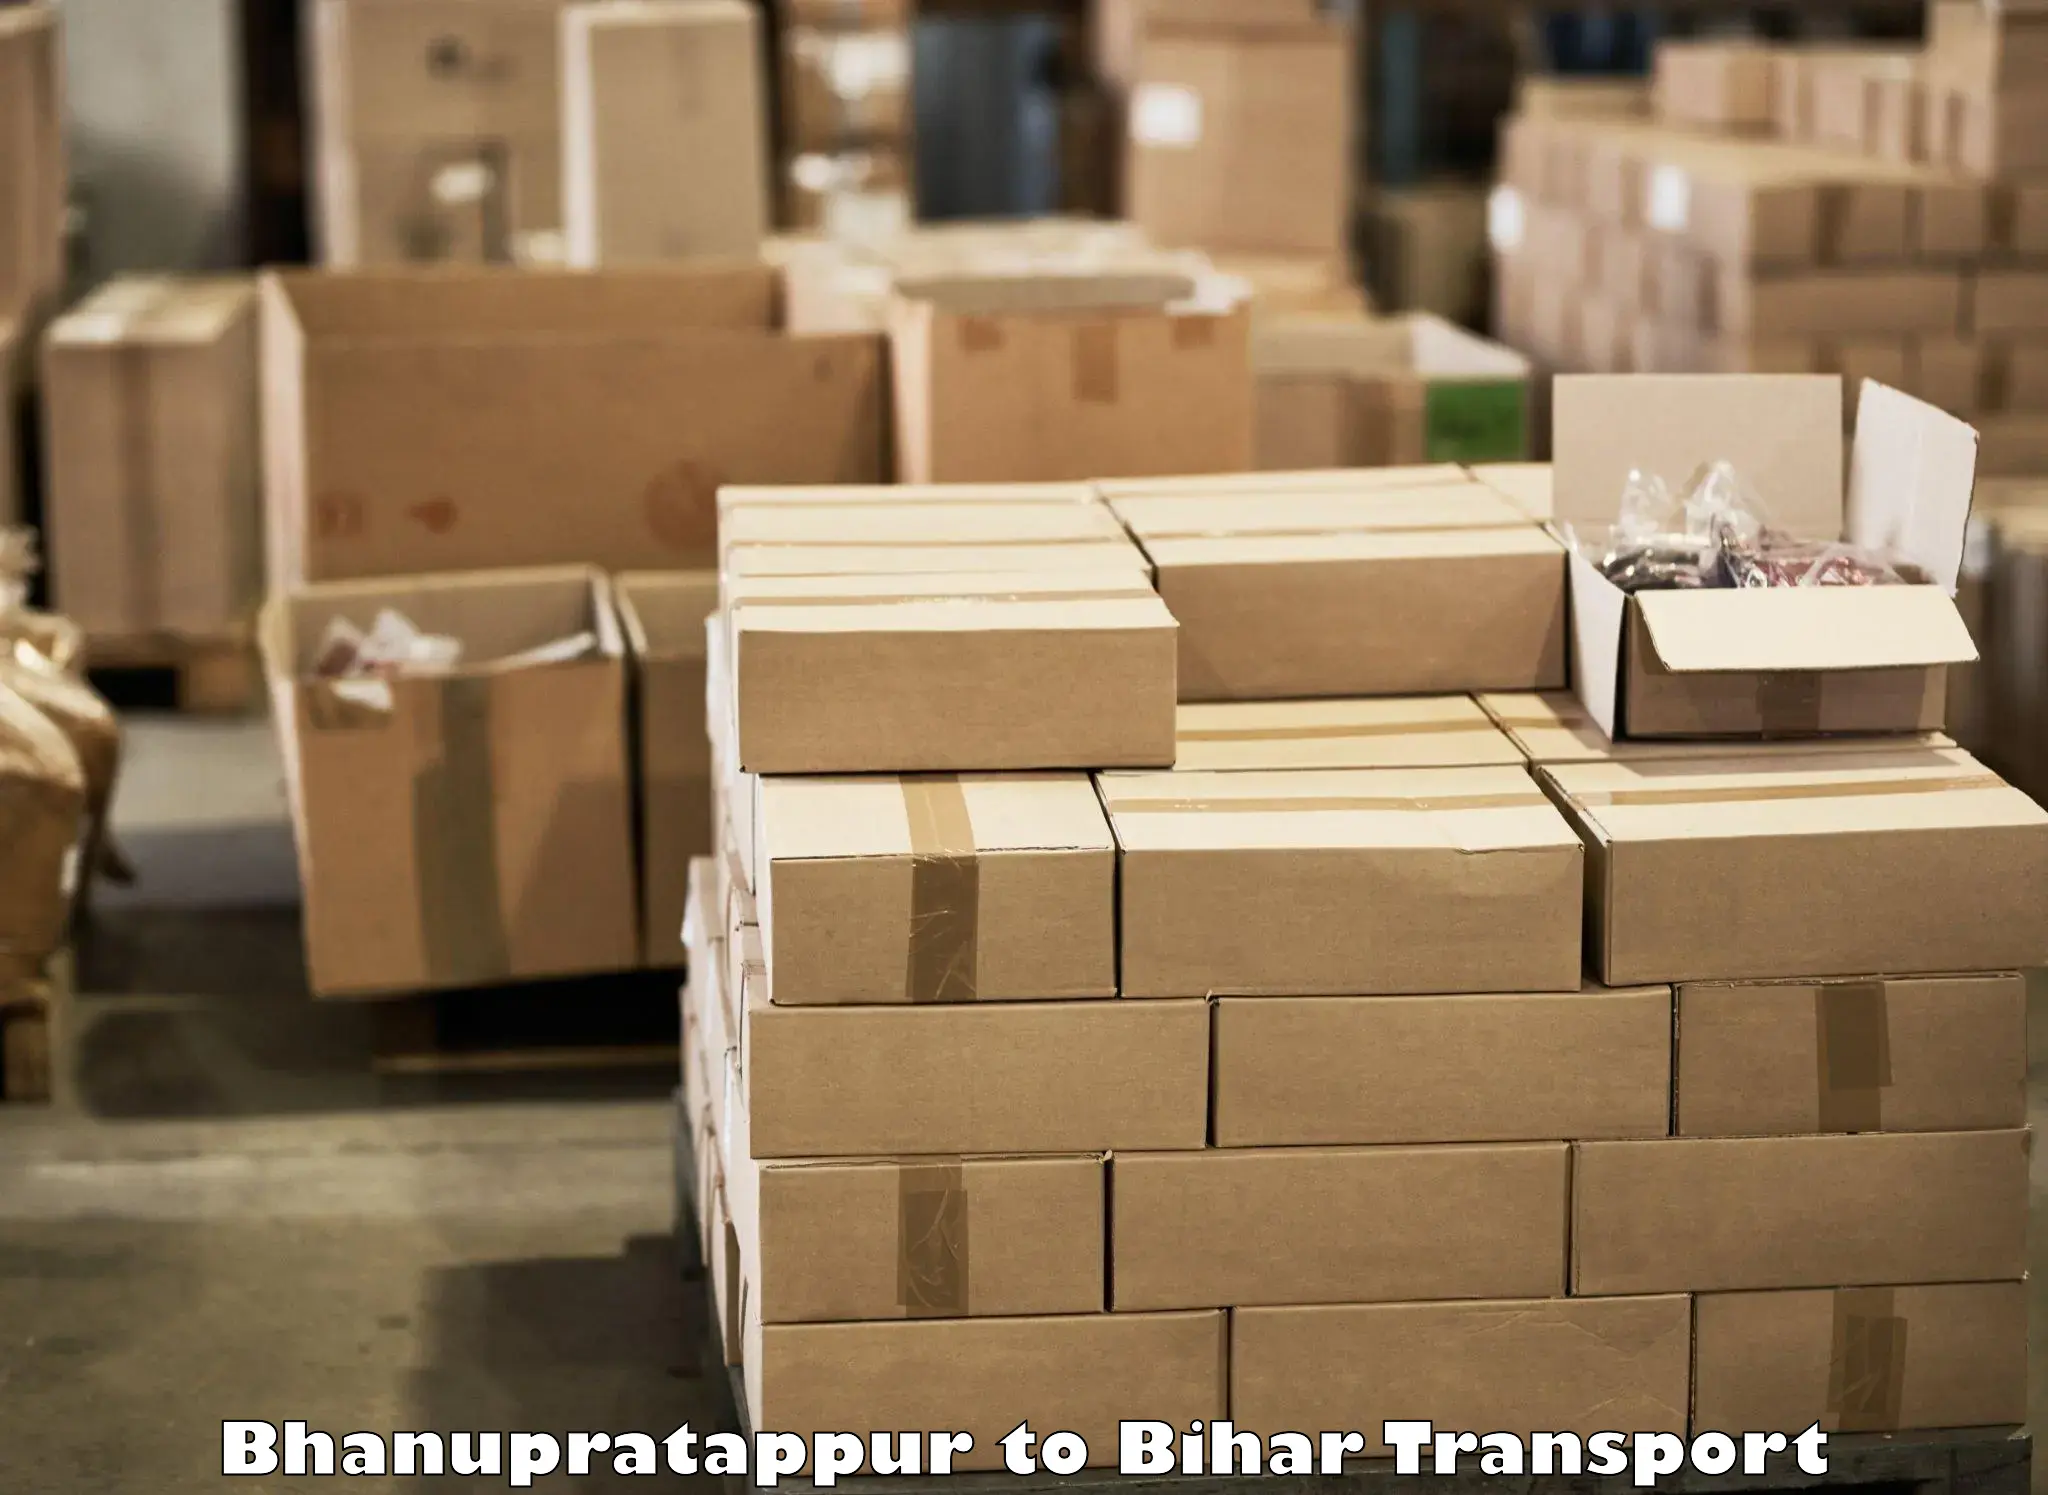 Air cargo transport services in Bhanupratappur to Kumarkhand